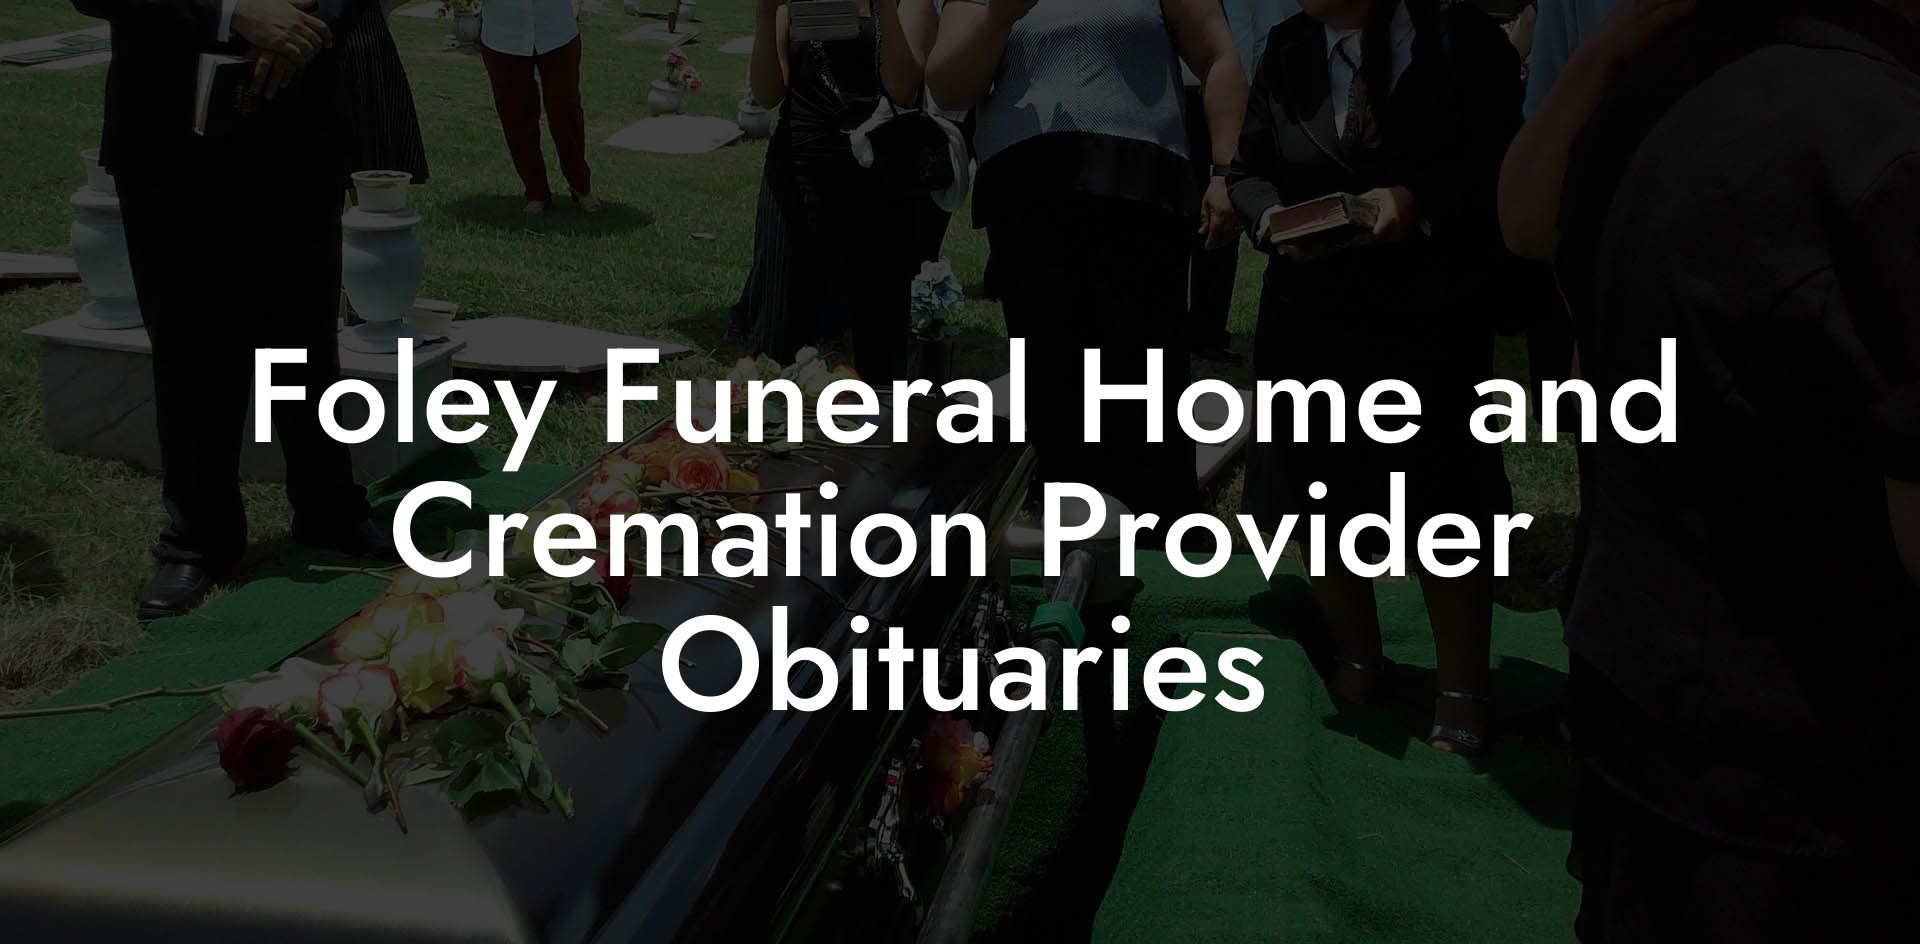 Foley Funeral Home and Cremation Provider Obituaries